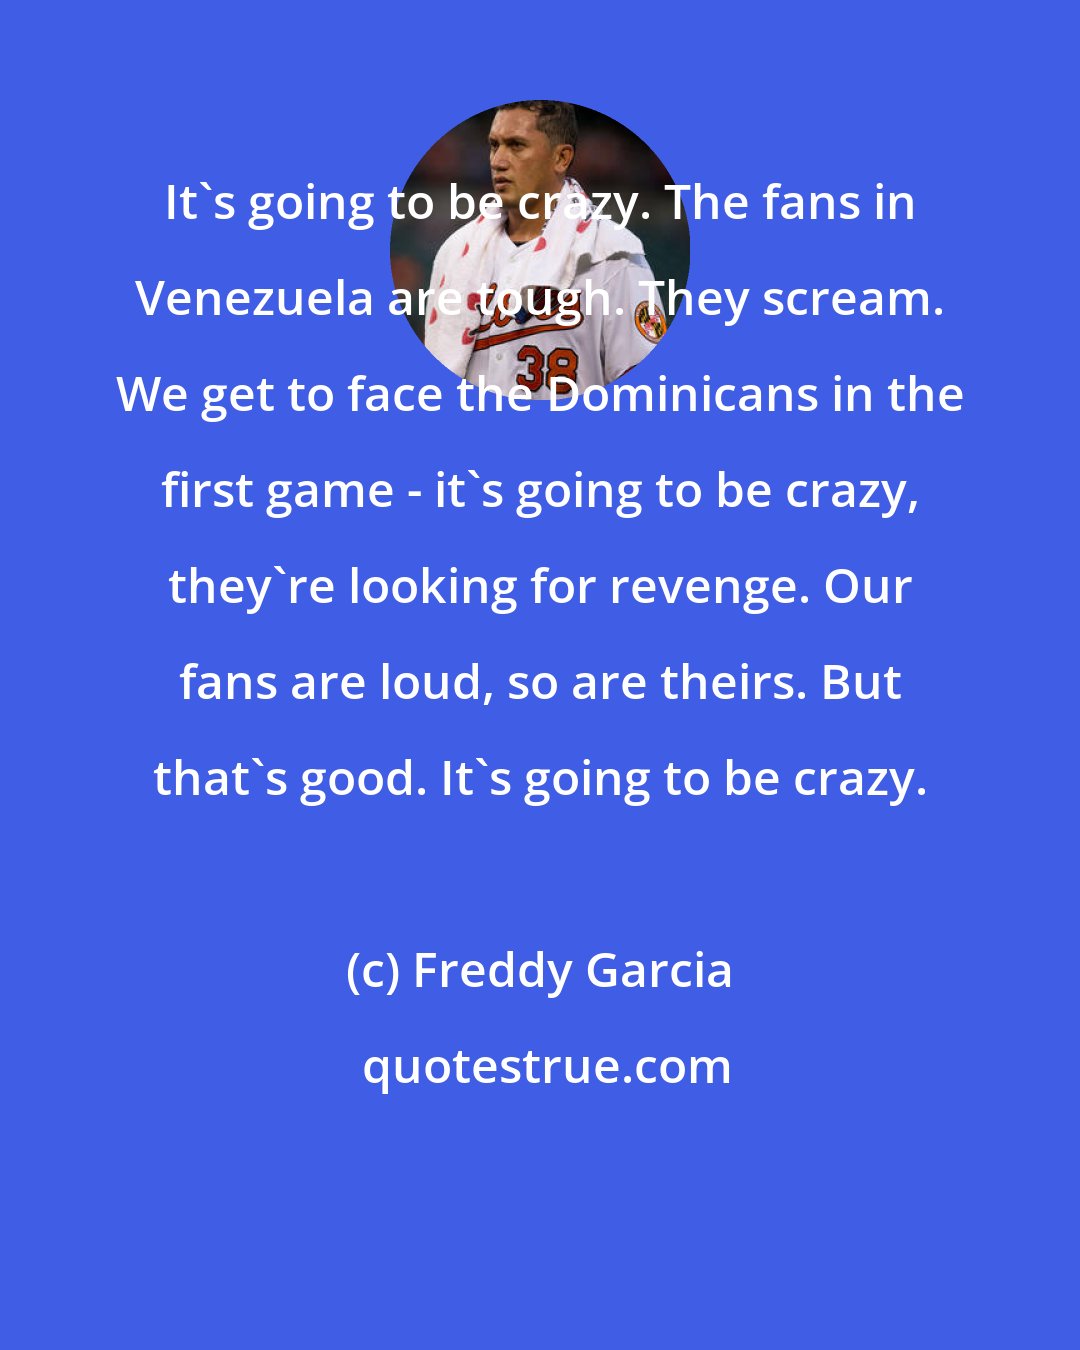 Freddy Garcia: It's going to be crazy. The fans in Venezuela are tough. They scream. We get to face the Dominicans in the first game - it's going to be crazy, they're looking for revenge. Our fans are loud, so are theirs. But that's good. It's going to be crazy.